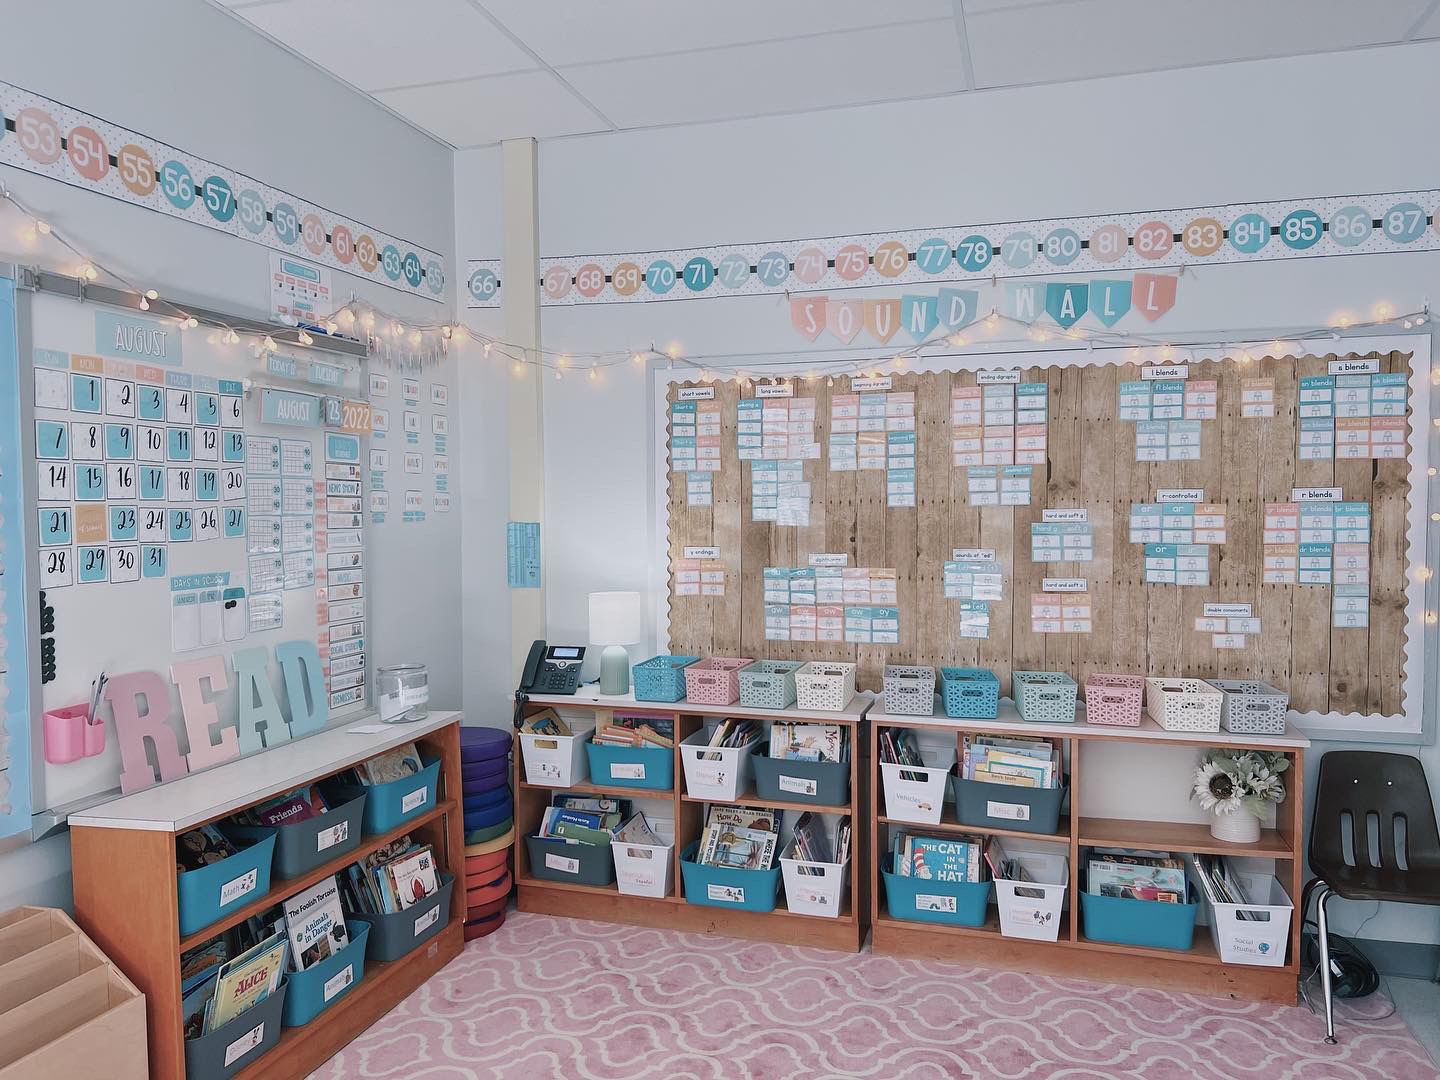 This image shows a reading corner with low bookshelves and books organized in buckets. There are modern calm color decor items all around the classroom. 